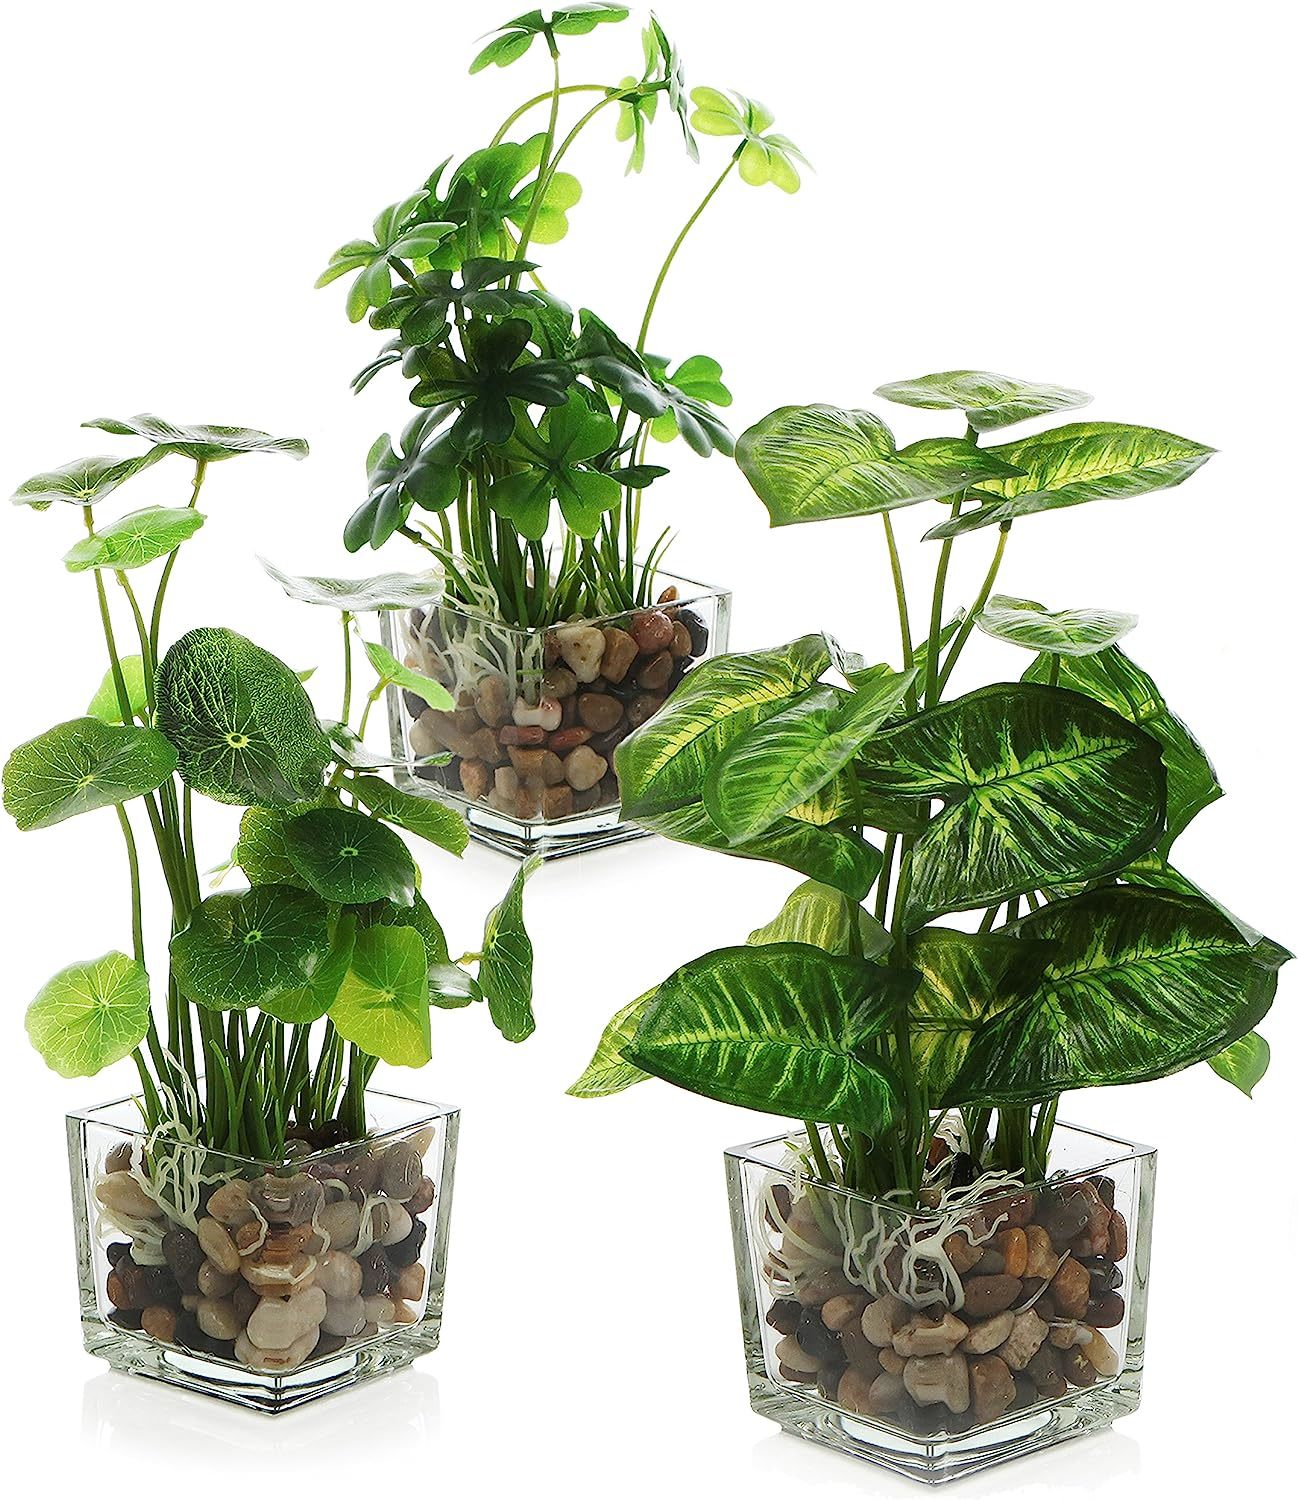 Set Of 3 Fake Plants From Mygift, Faux Tabletop Greenery With Clear Glass Pots. - $38.96